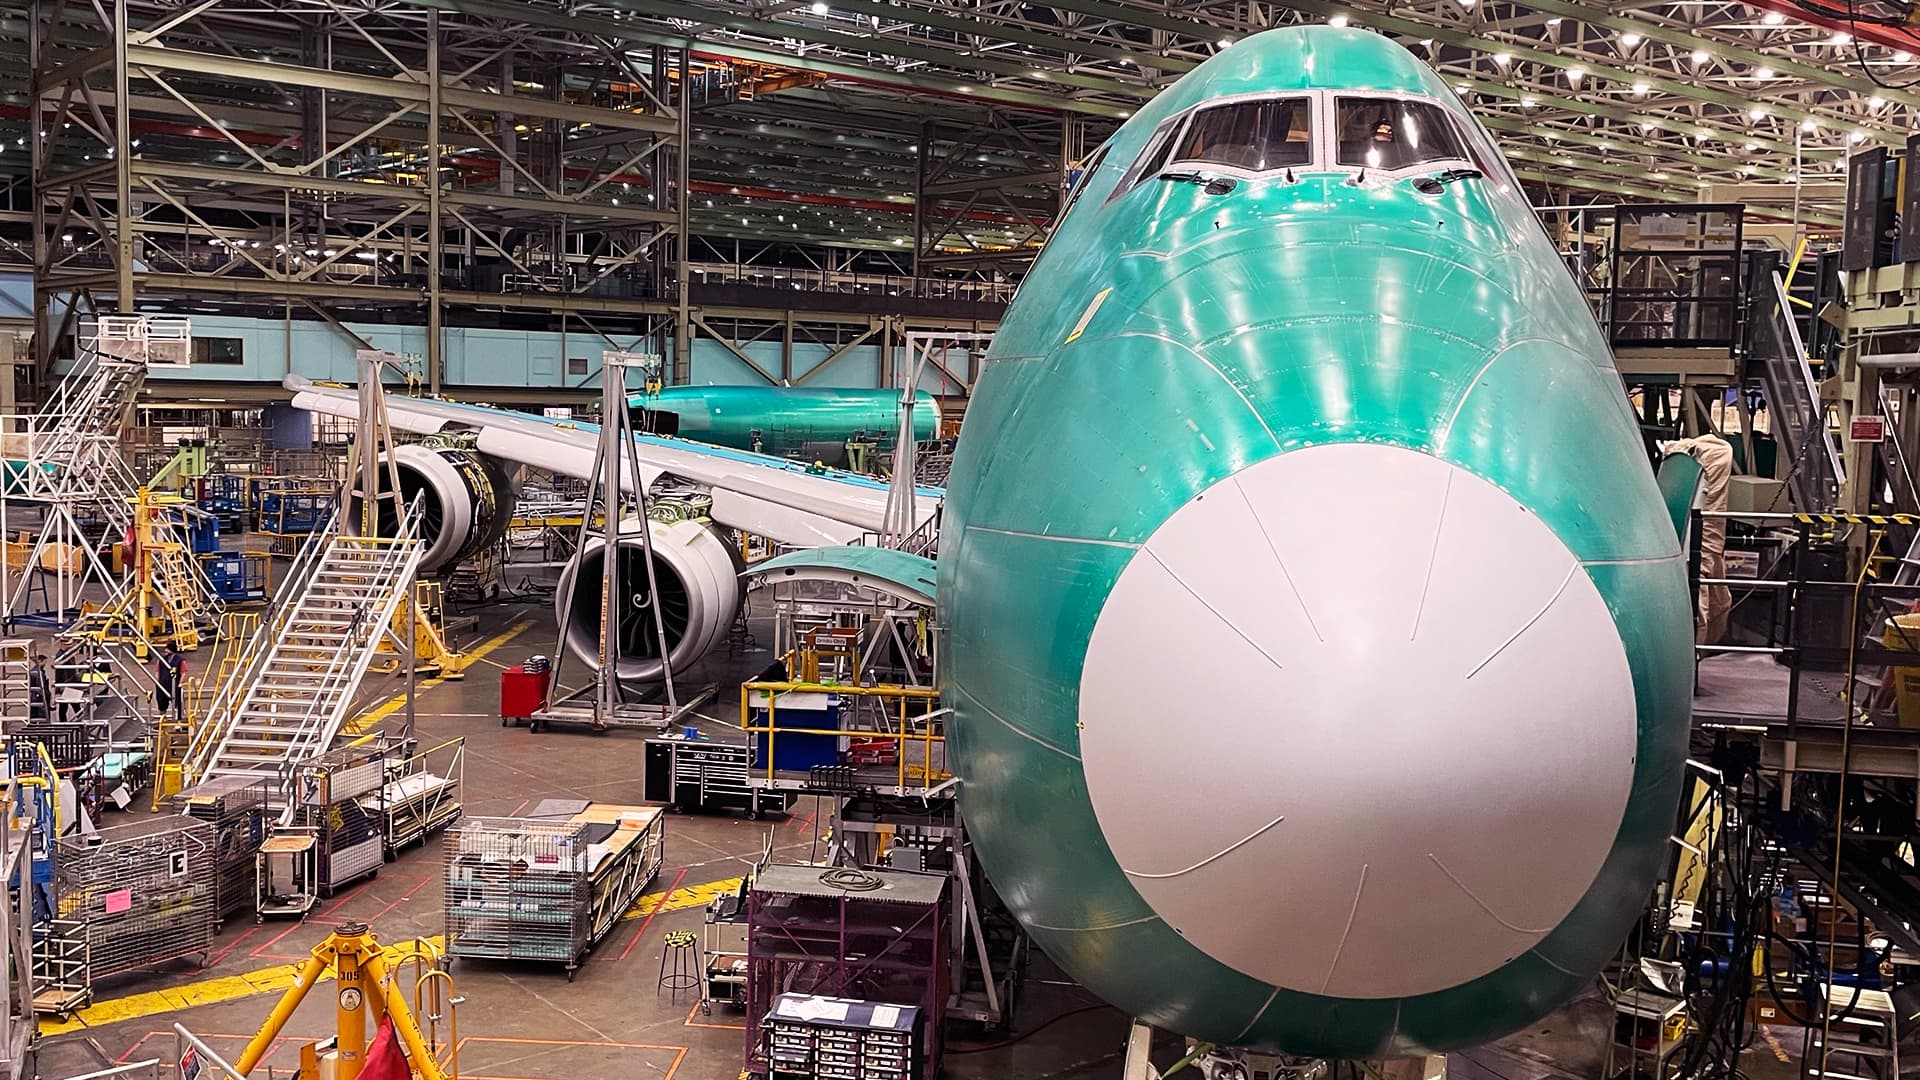 Boeing’s last 747 has rolled out of the factory after